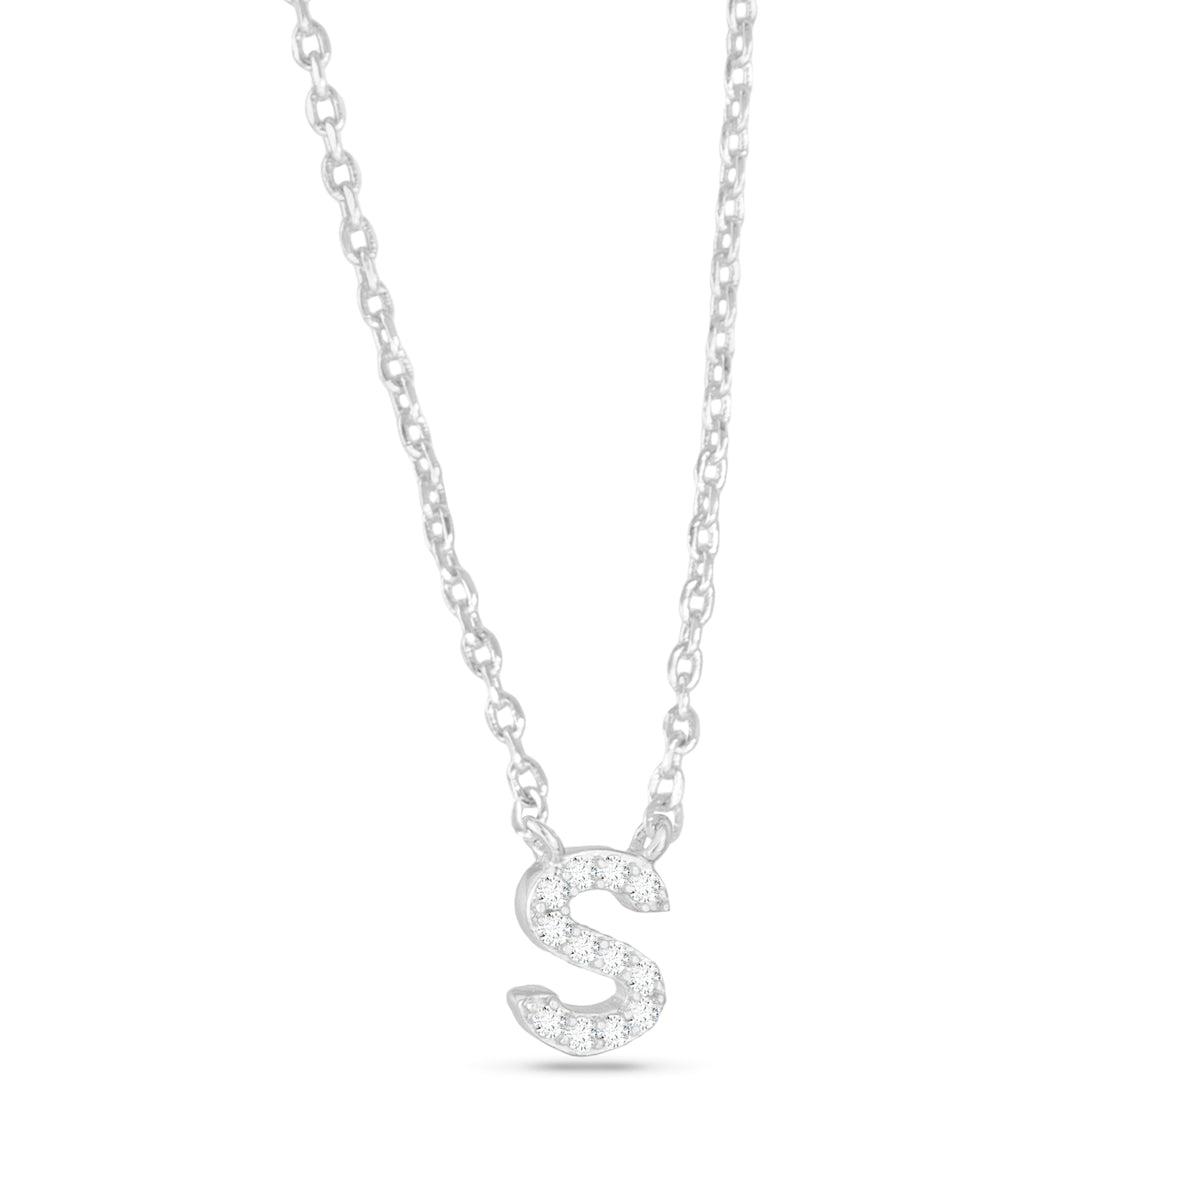 Silver CZ Initial Necklace - S